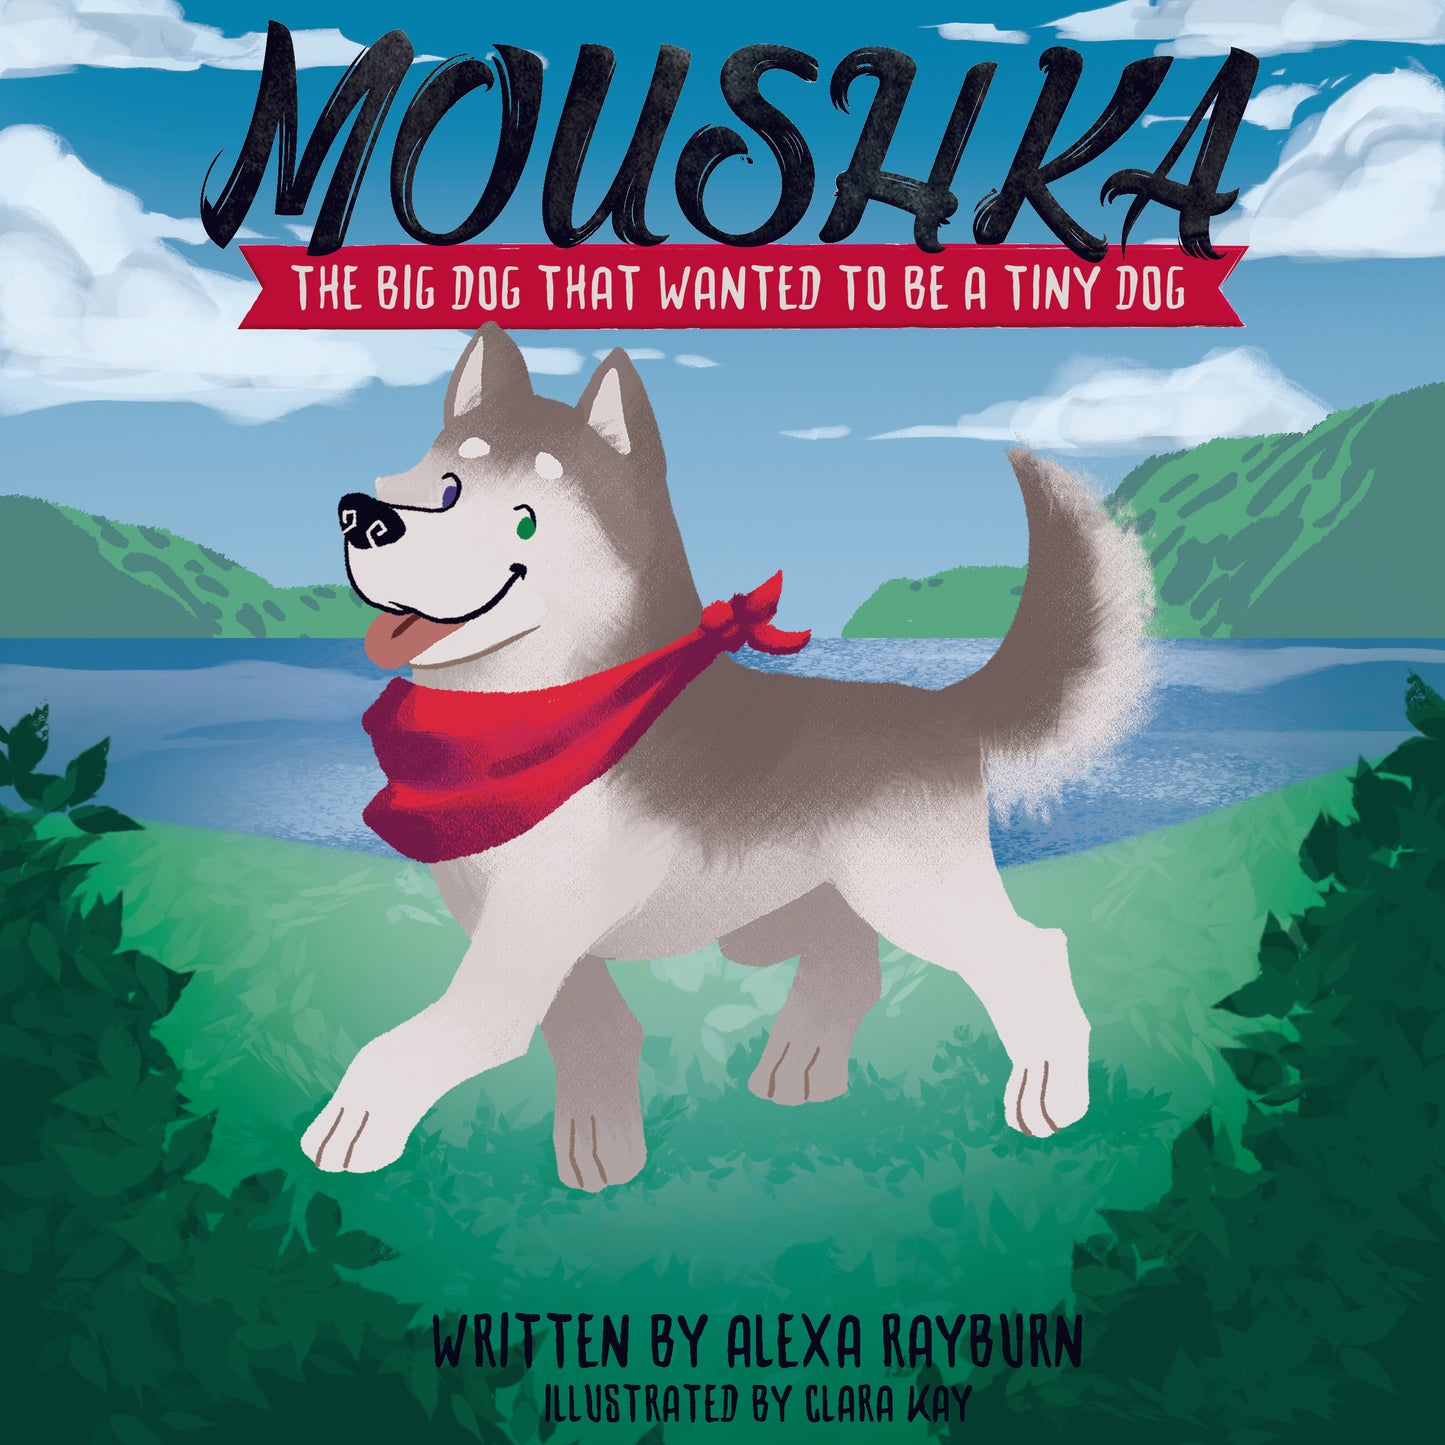 Moushka The Big Dog That Wanted To Be A Tiny Dog